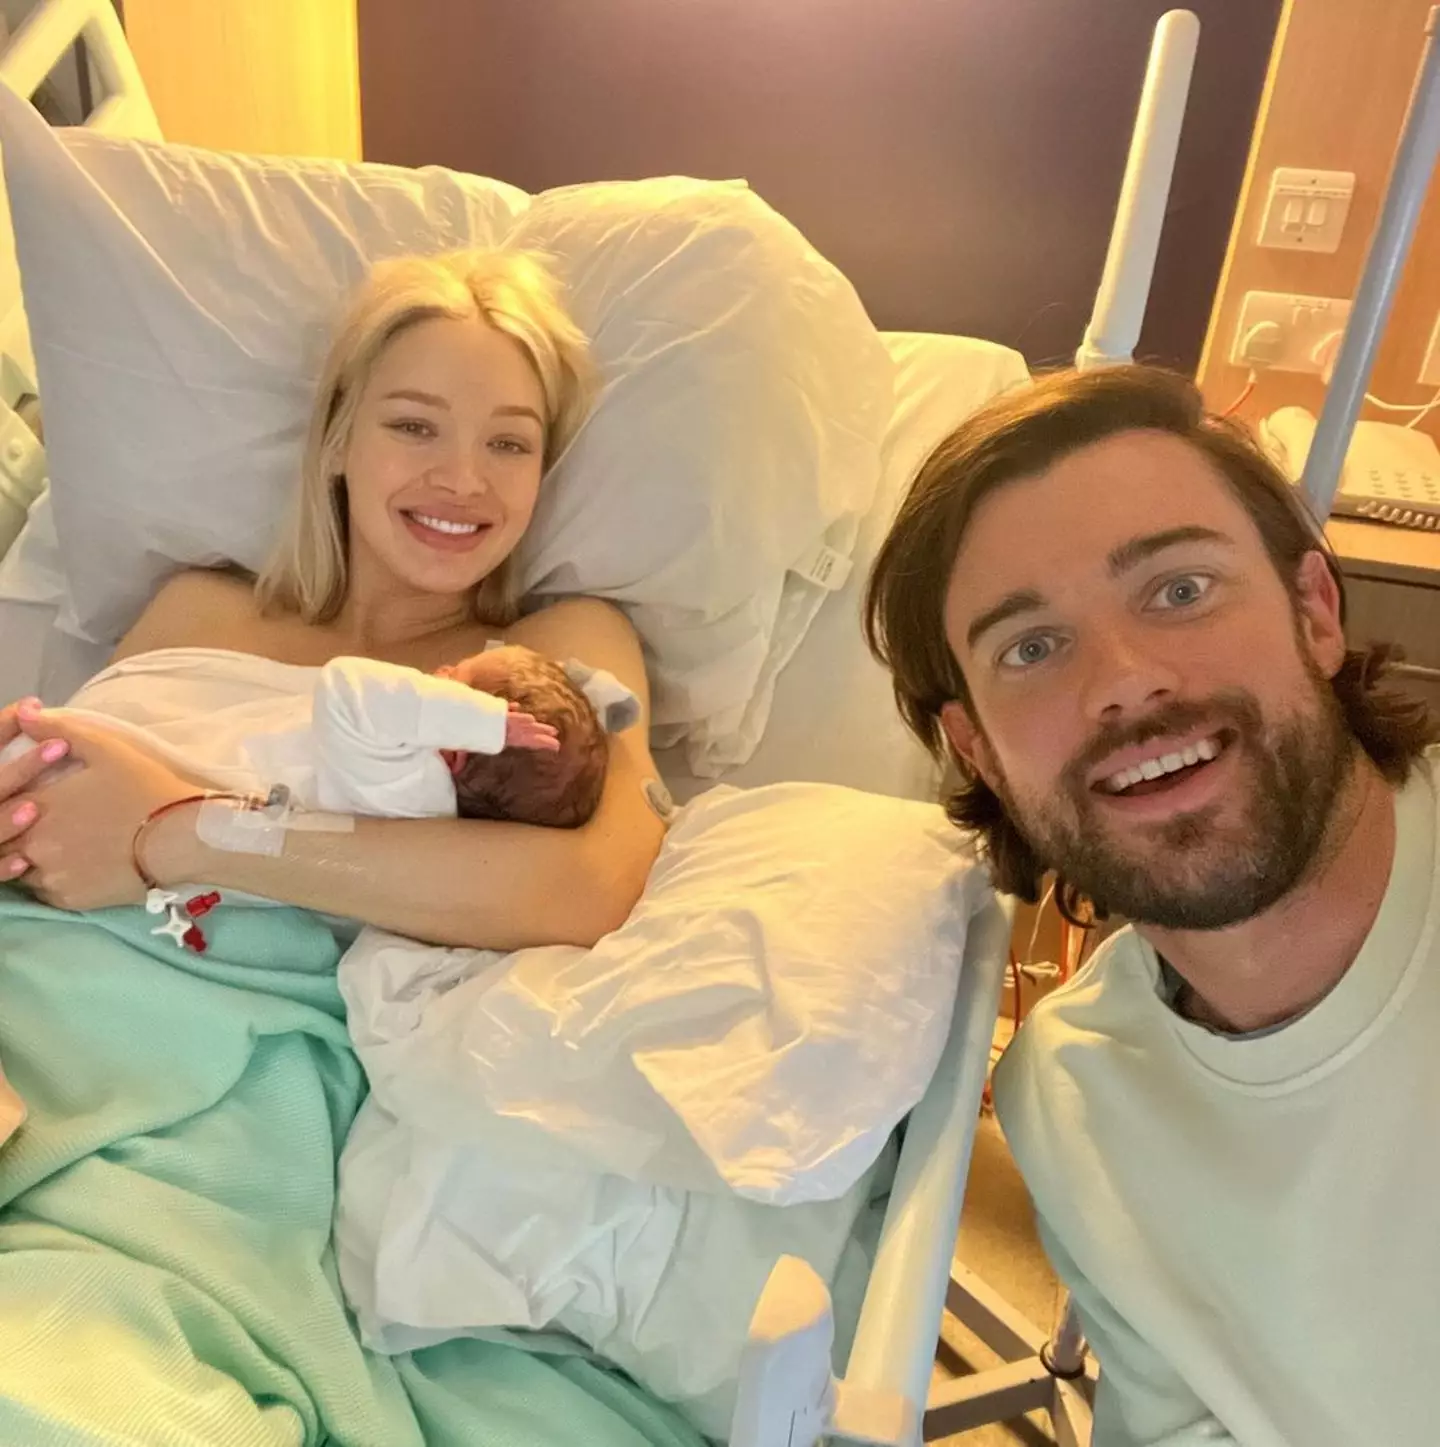 Jack Whitehall's has announced the birth of he and Roxy Horner's first child.